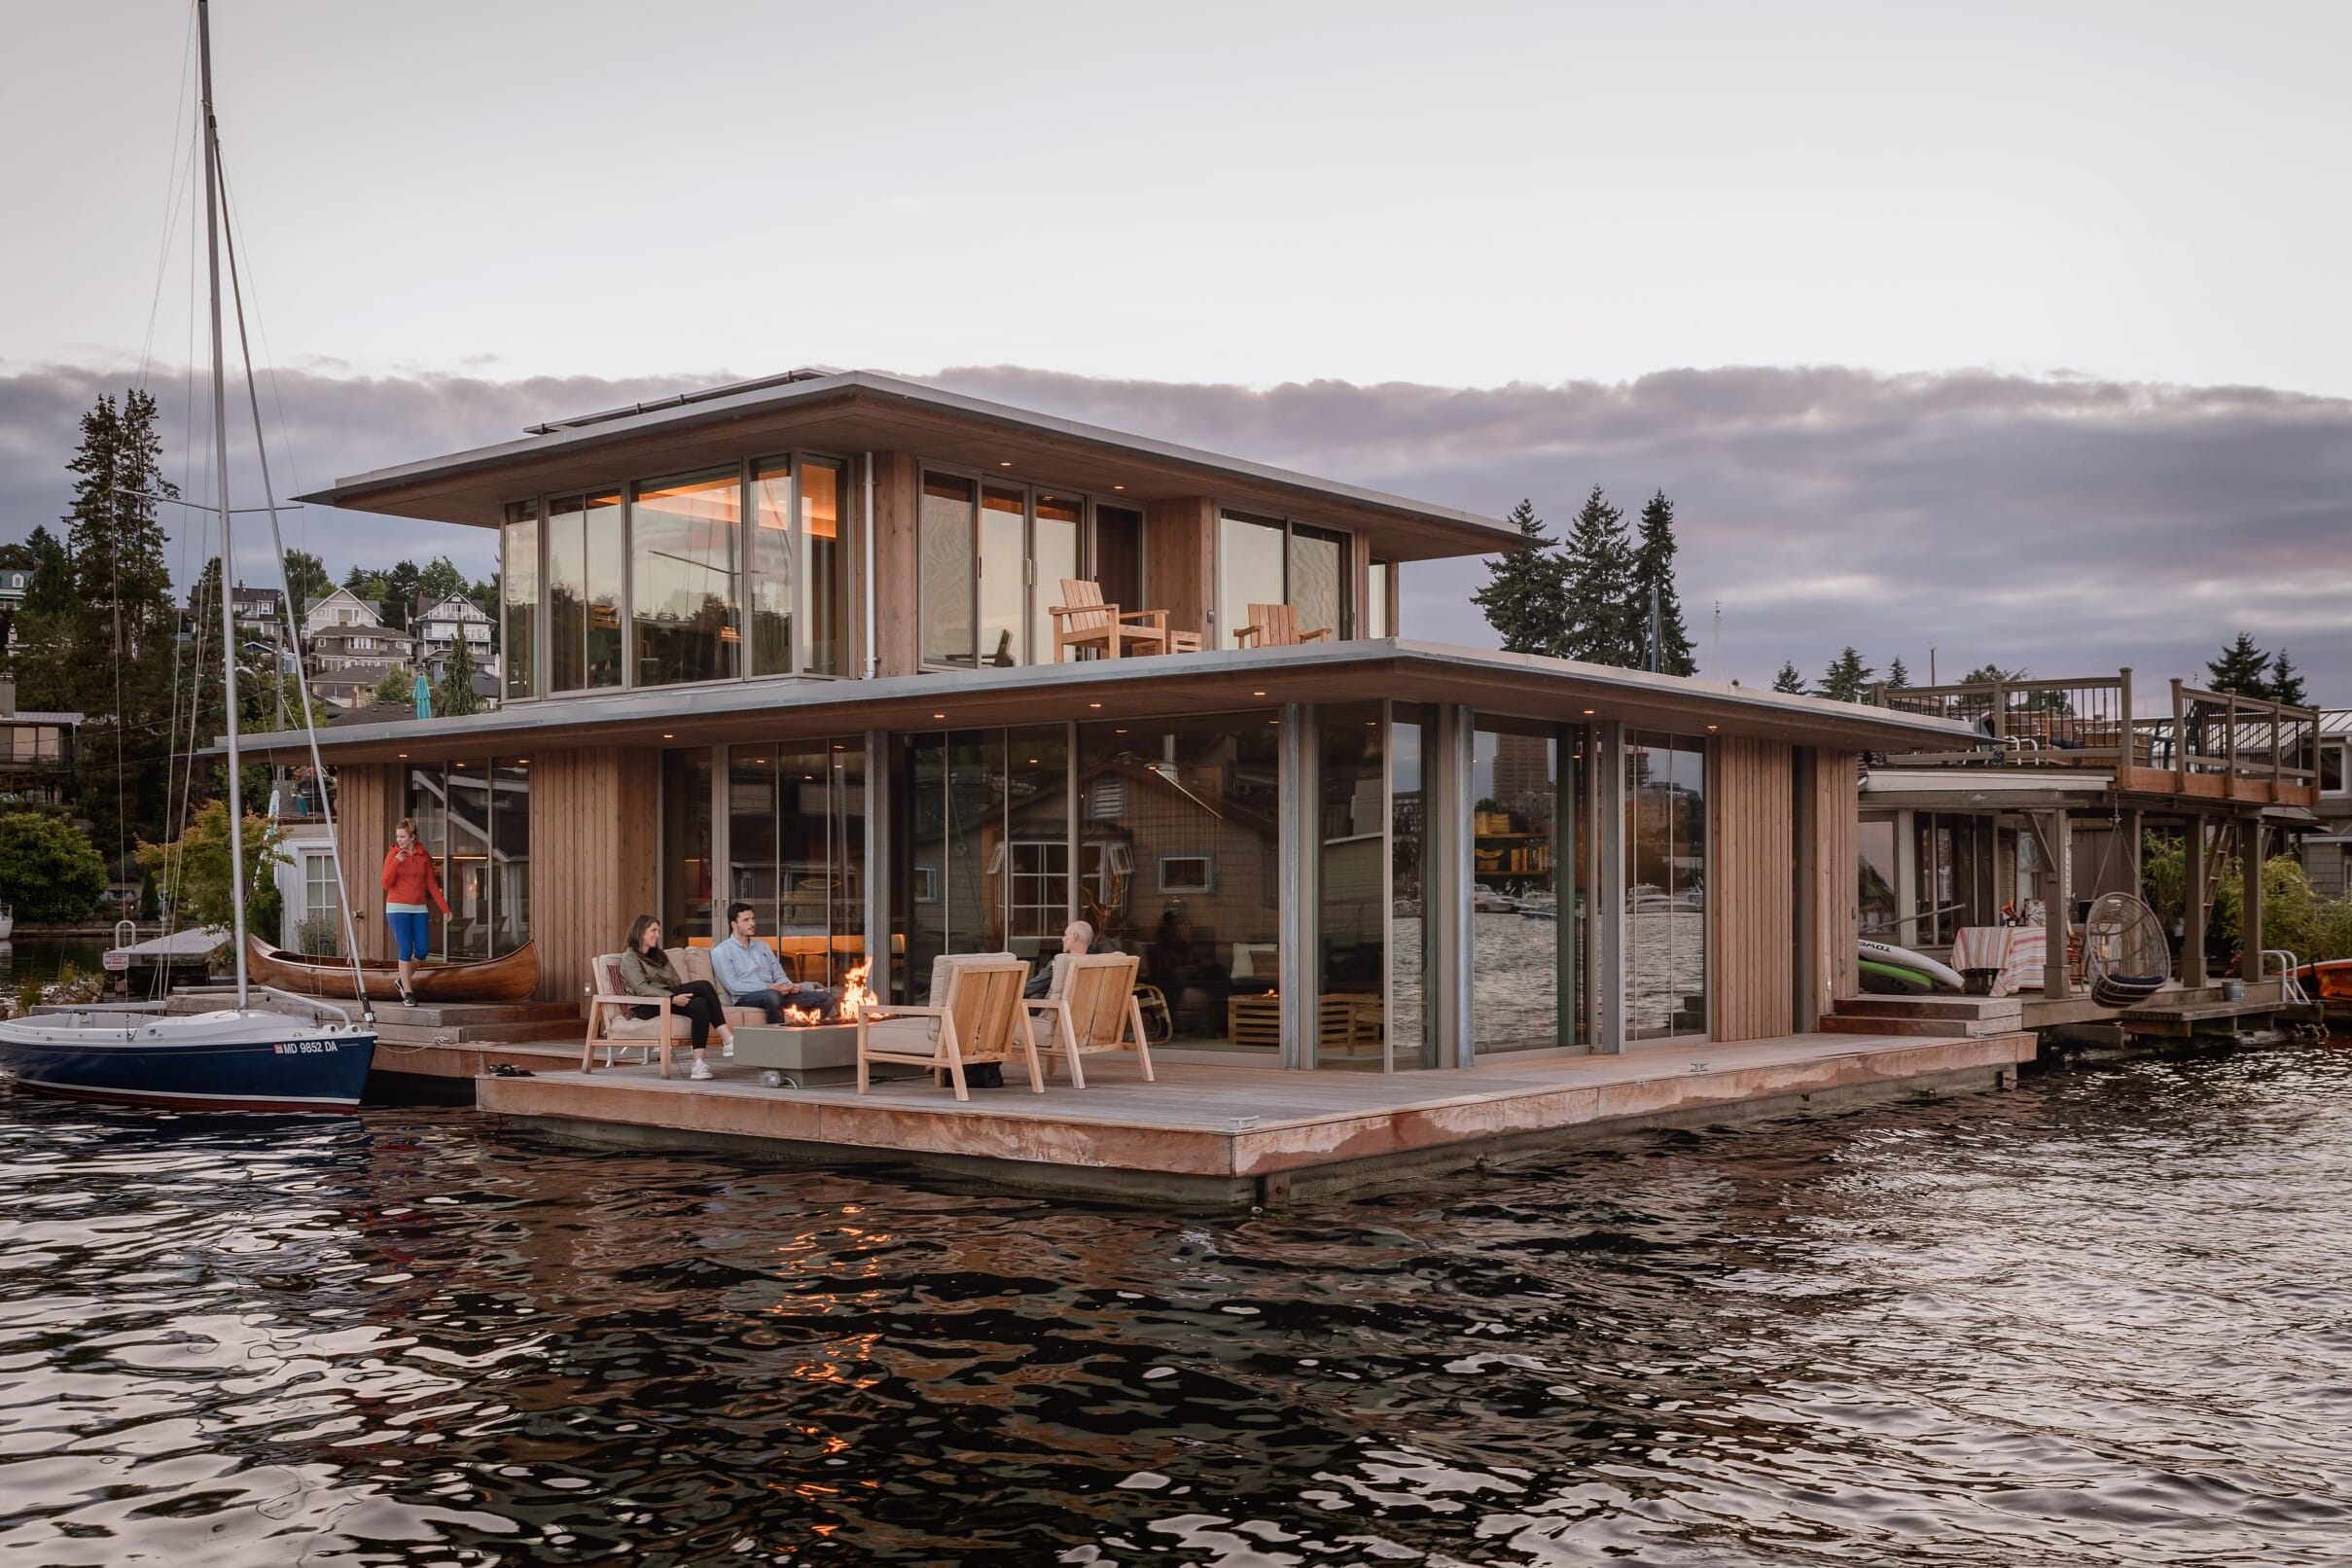 A modern floating home crafted by a skilled carpenter on a body of water.